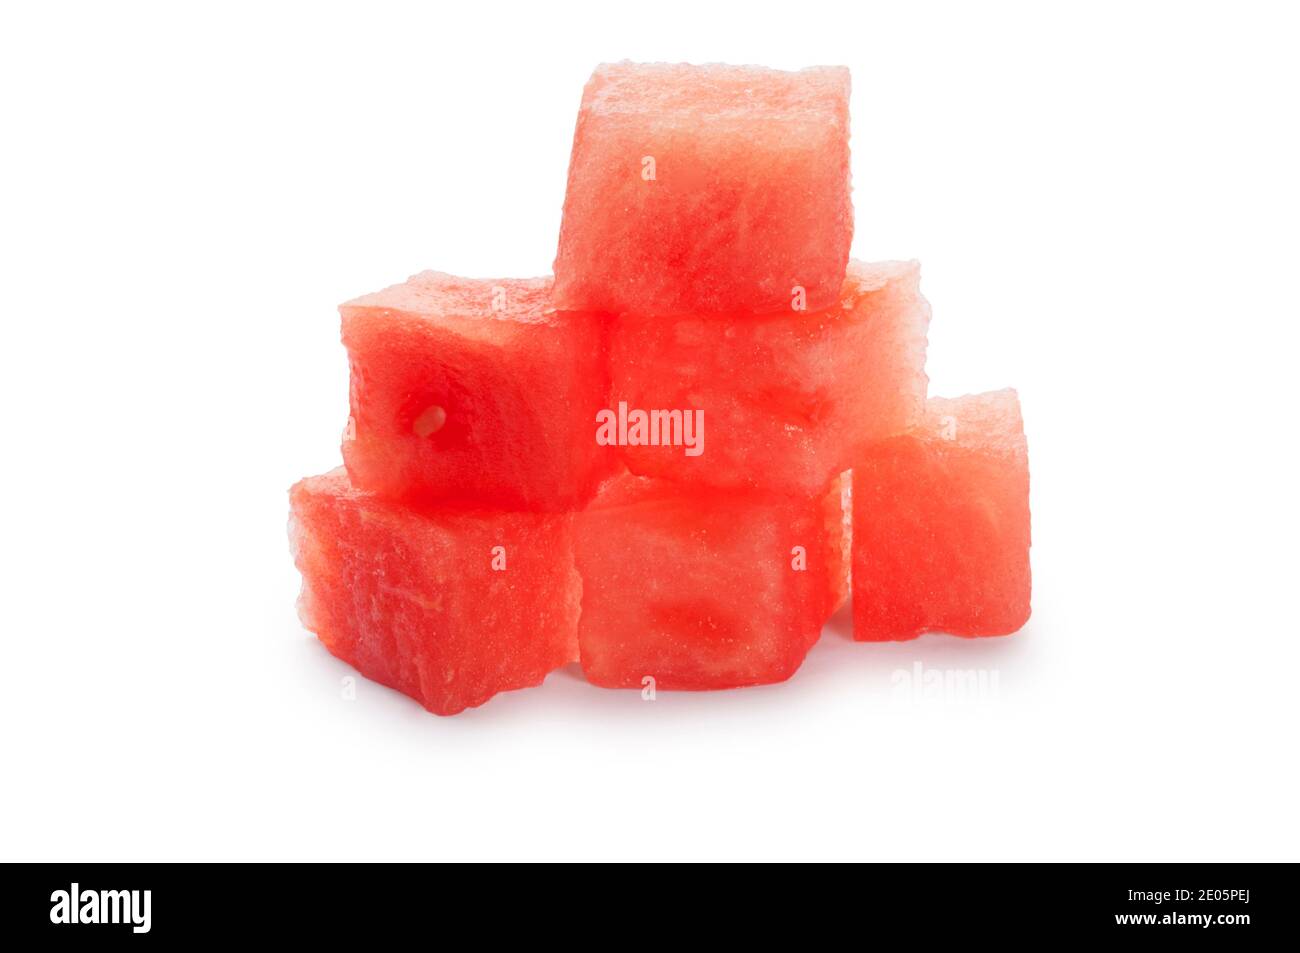 Studio shot of small pieces of water melon cut out against a white background - John Gollop Stock Photo